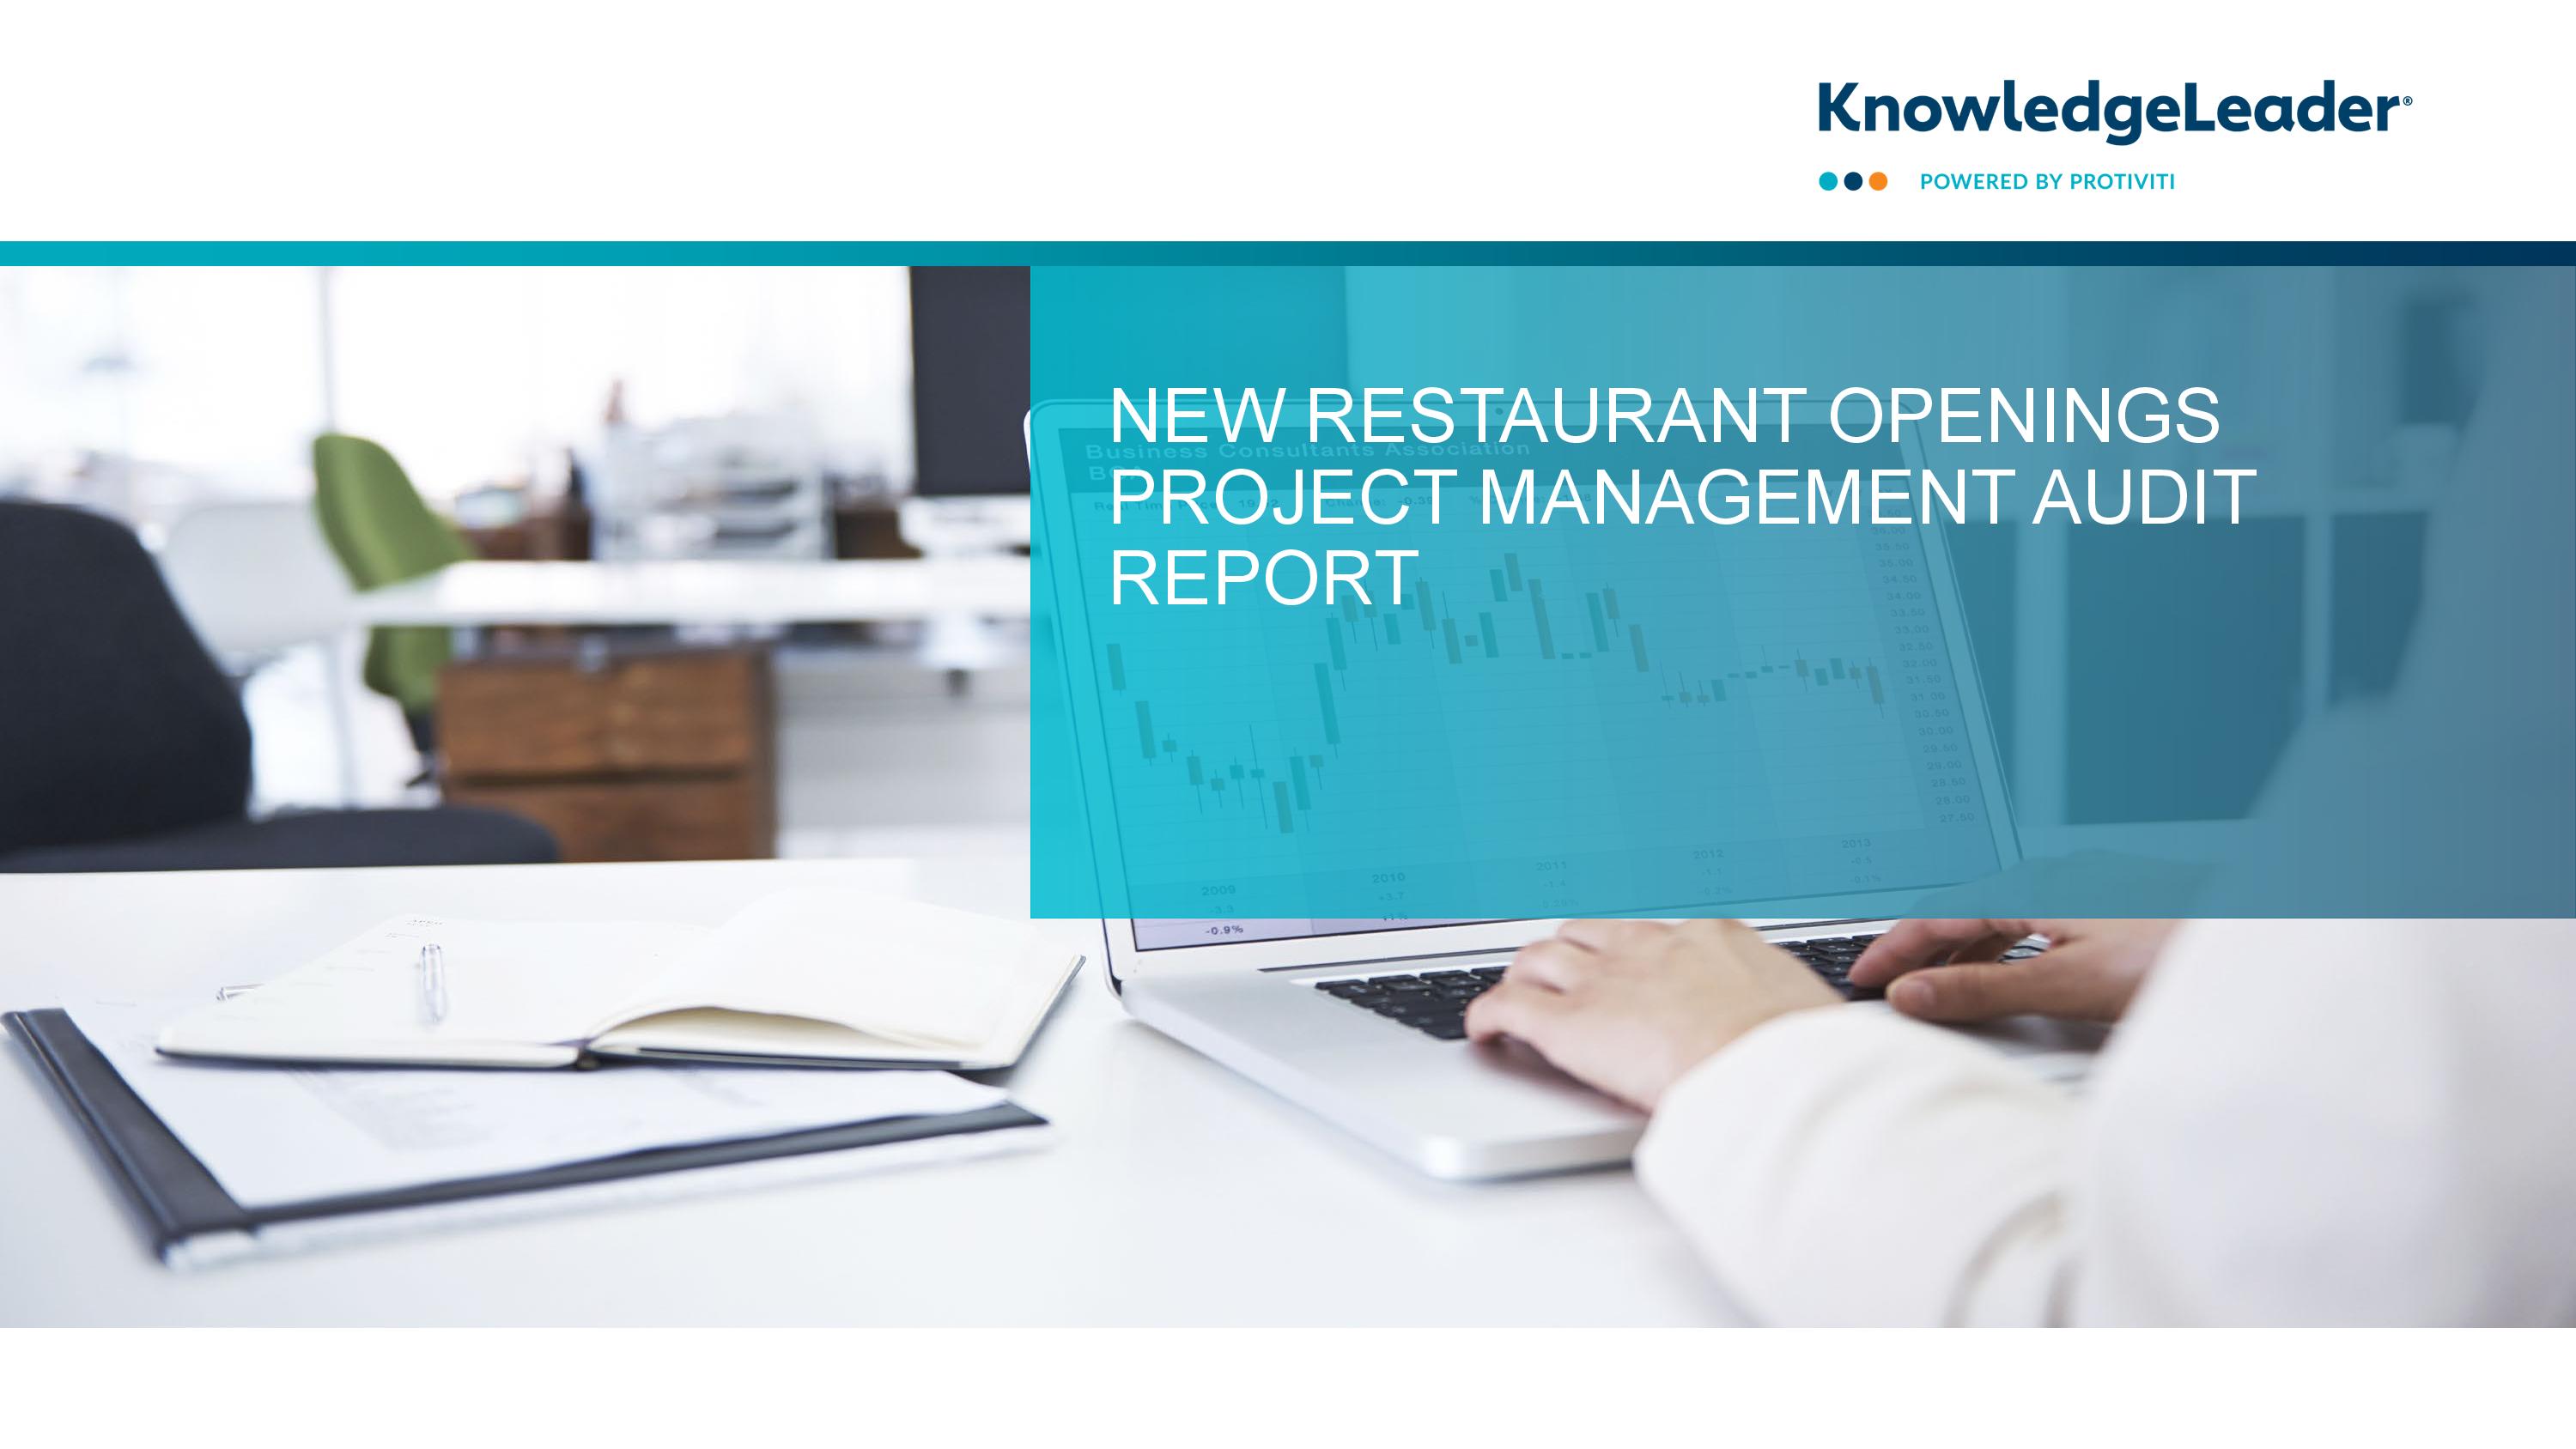 screenshot of the first page of New Restaurant Openings Project Management Audit Report